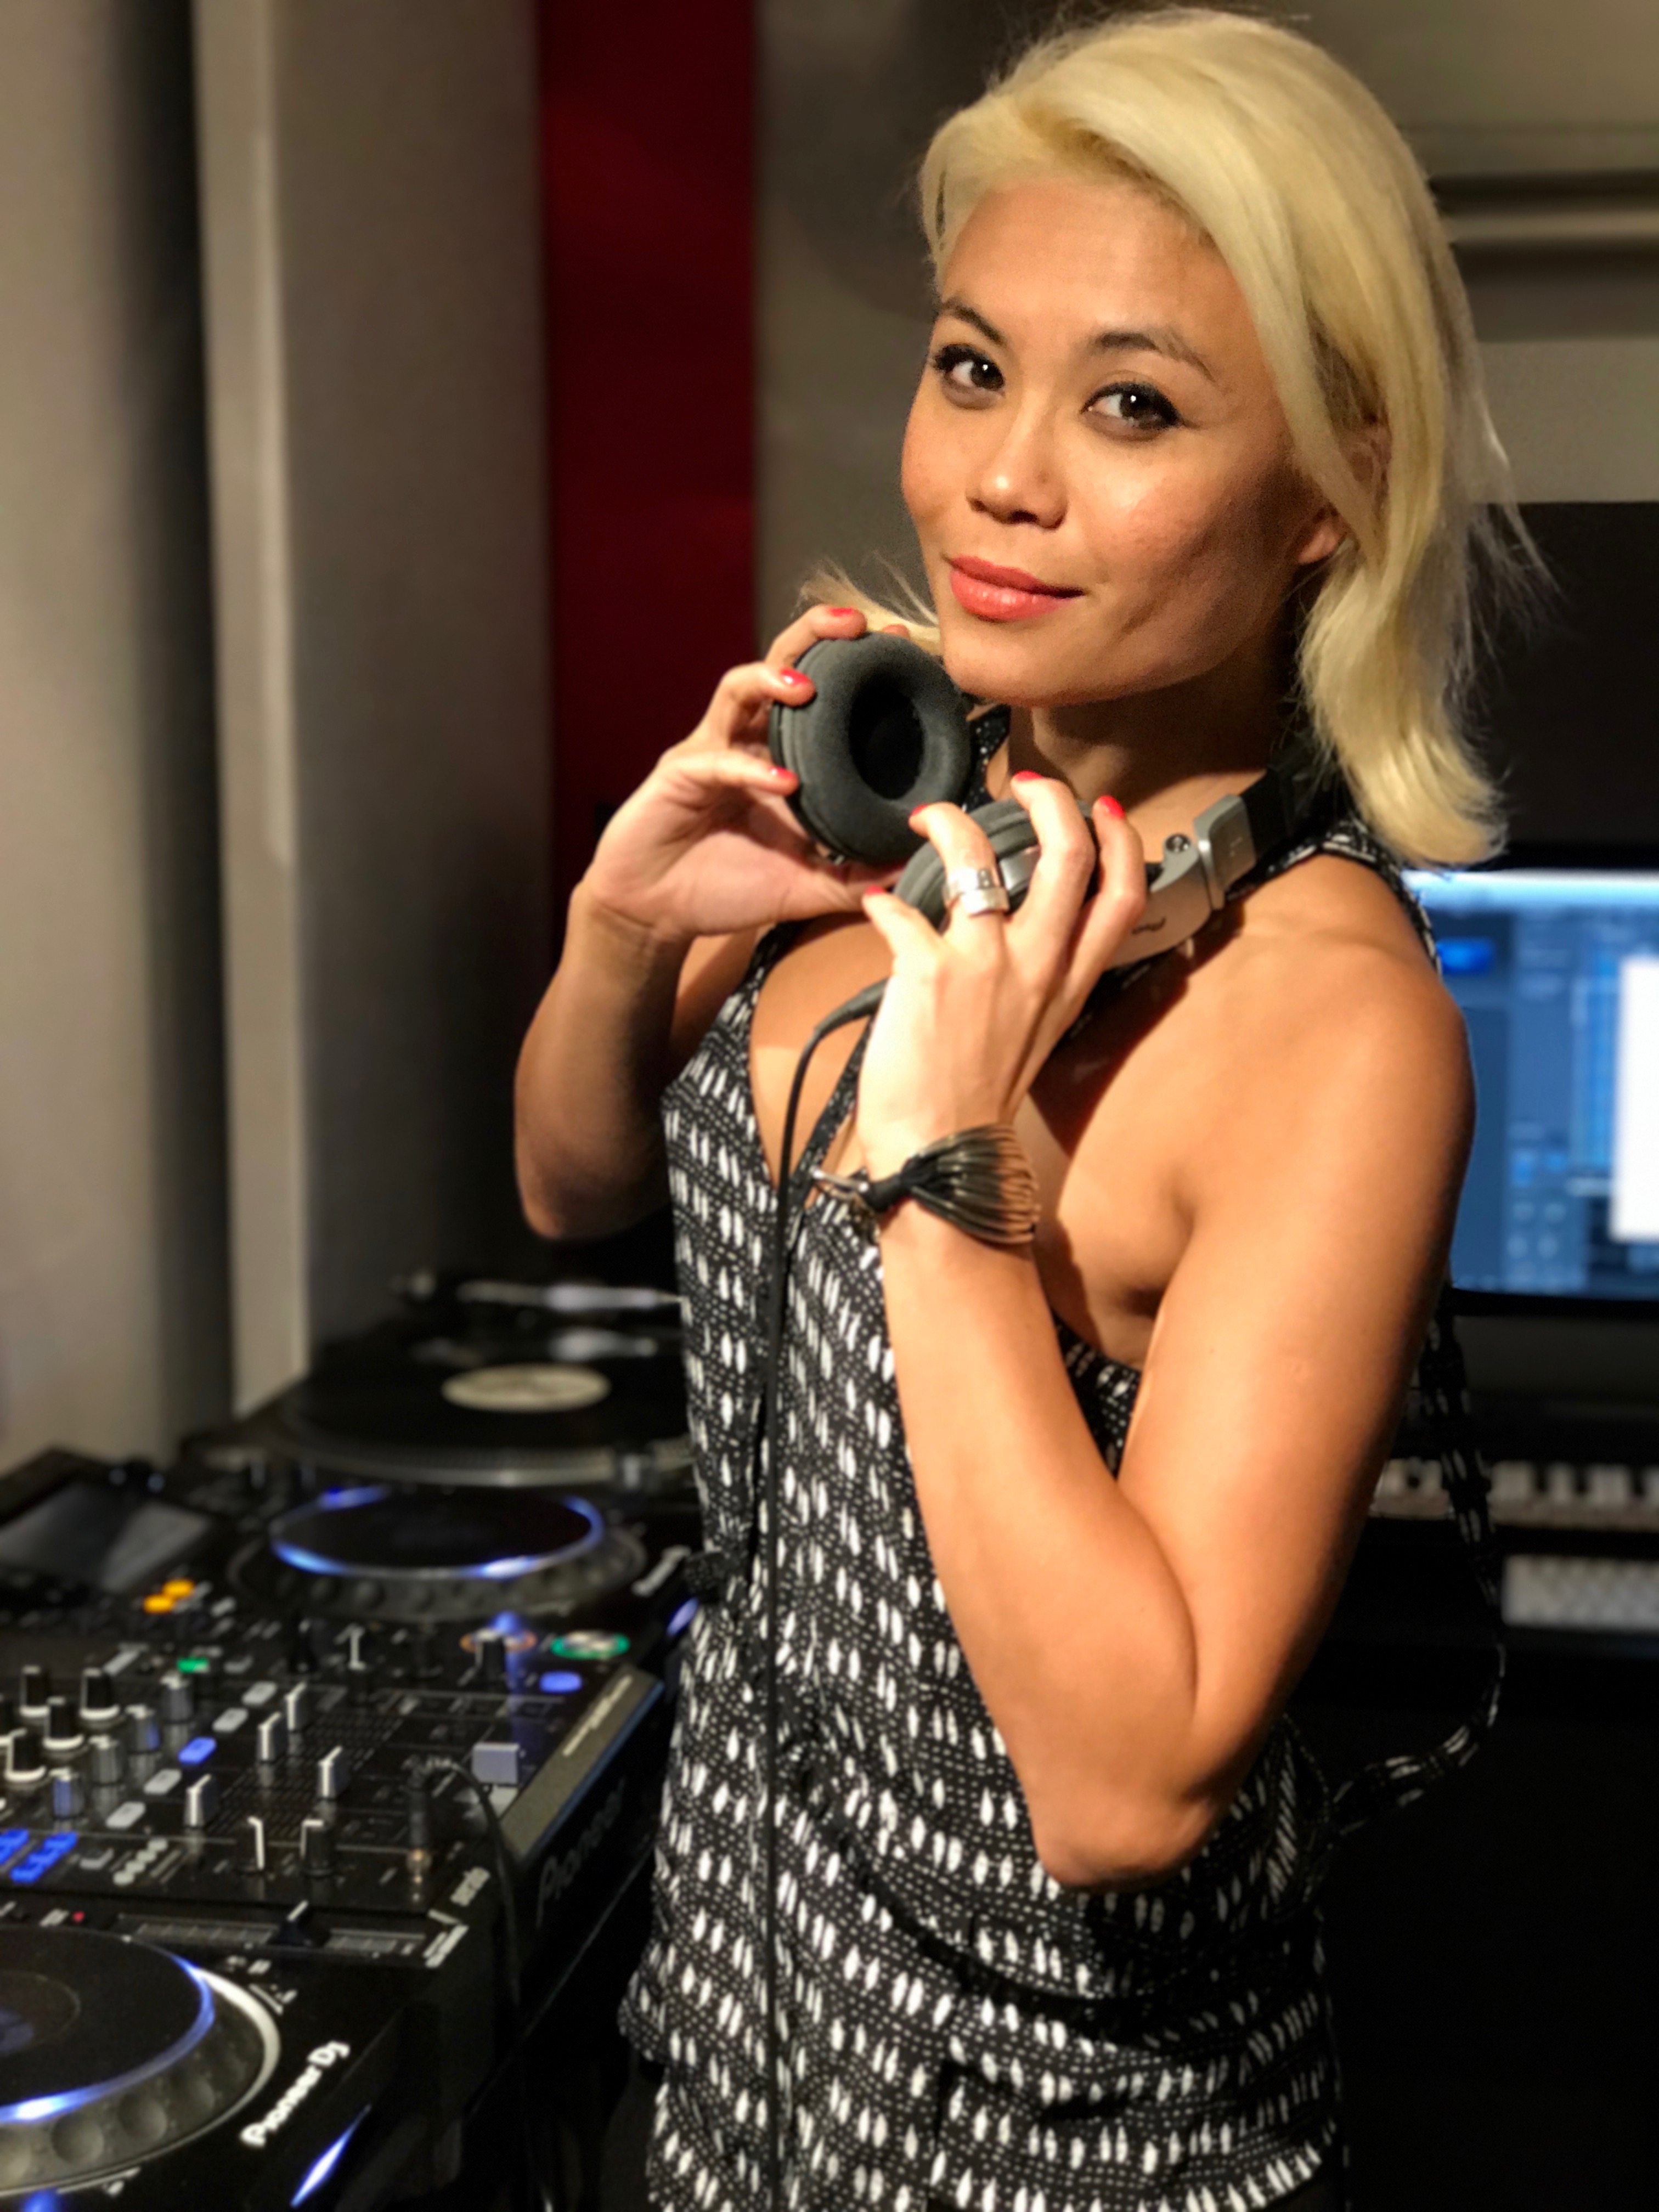 Janette Slack, 36, Eurasian DJ, composer, and producer, at her studio in Kowloon, Hong Kong, on June 19, 2017.  People are always curious where I’m from. My accent is slightly English, slightly American, with a bit of an Australian twang, and of course we throw in a bit of Cantonese [and pidgin] just naturally. I’m more forgiving of people who are shocked that when I open my mouth I sound the way I do. I call it the Hong Kong accent. But in their minds, people expect a Chinese accent. I’ve met a lot of Eurasians in England who say to me ‘I’m English,’ and I’m like, ‘How can you say that?’ I’m very proud to be from Hong Kong. We always thought it would be devastating after the handover but everyone who said they were going to leave is still here and still having a good time.”